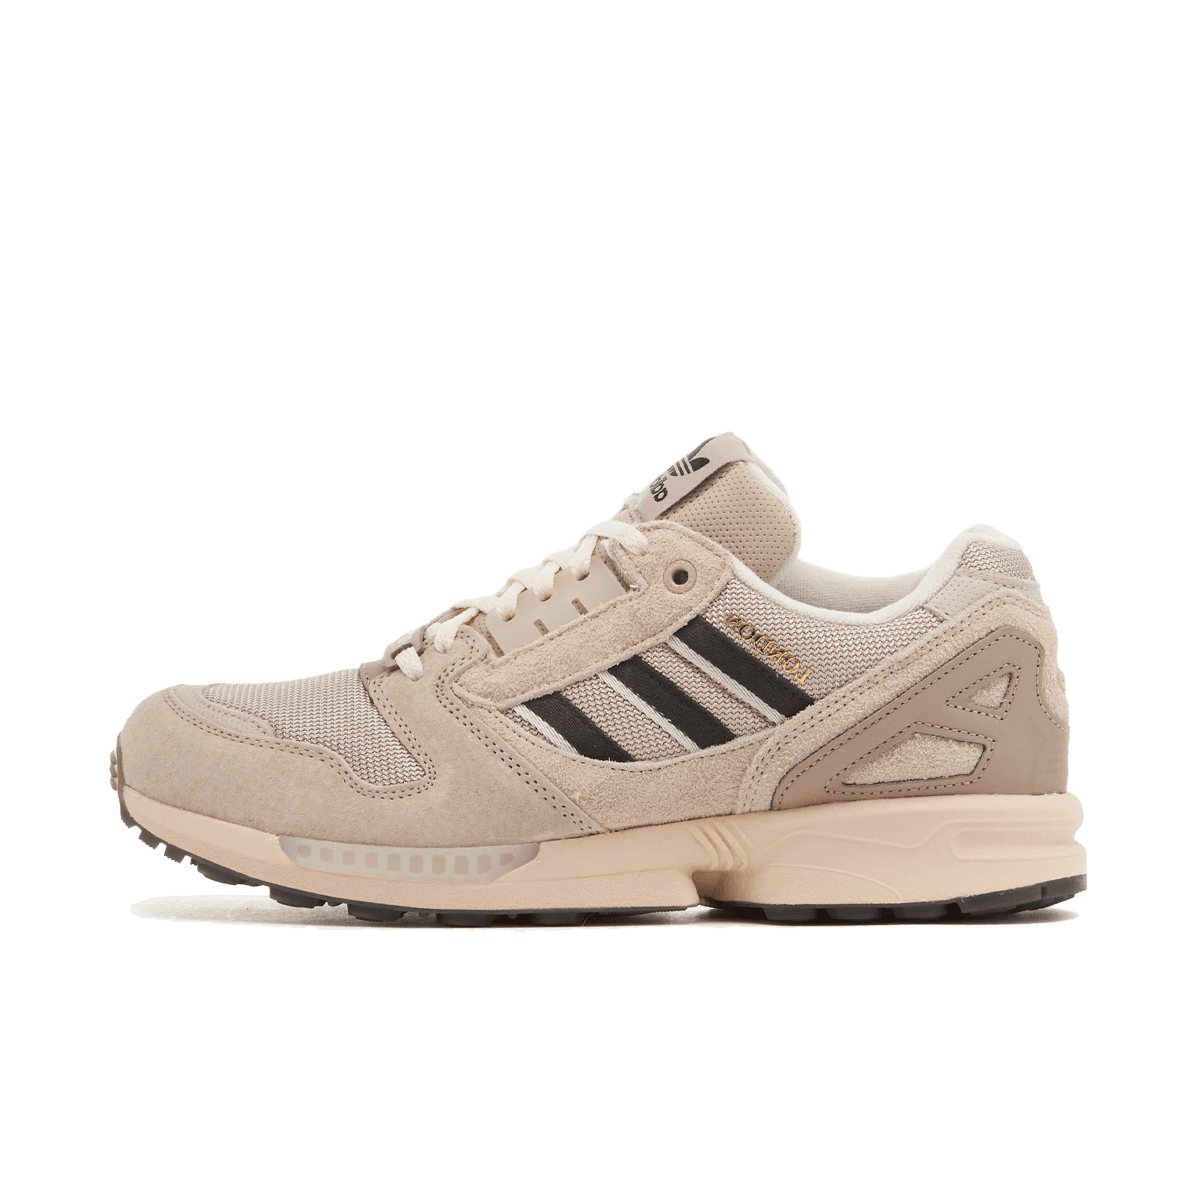 Offspring x adidas ZX8000 'Beige' - Consortium Cup | ID2909 | The 